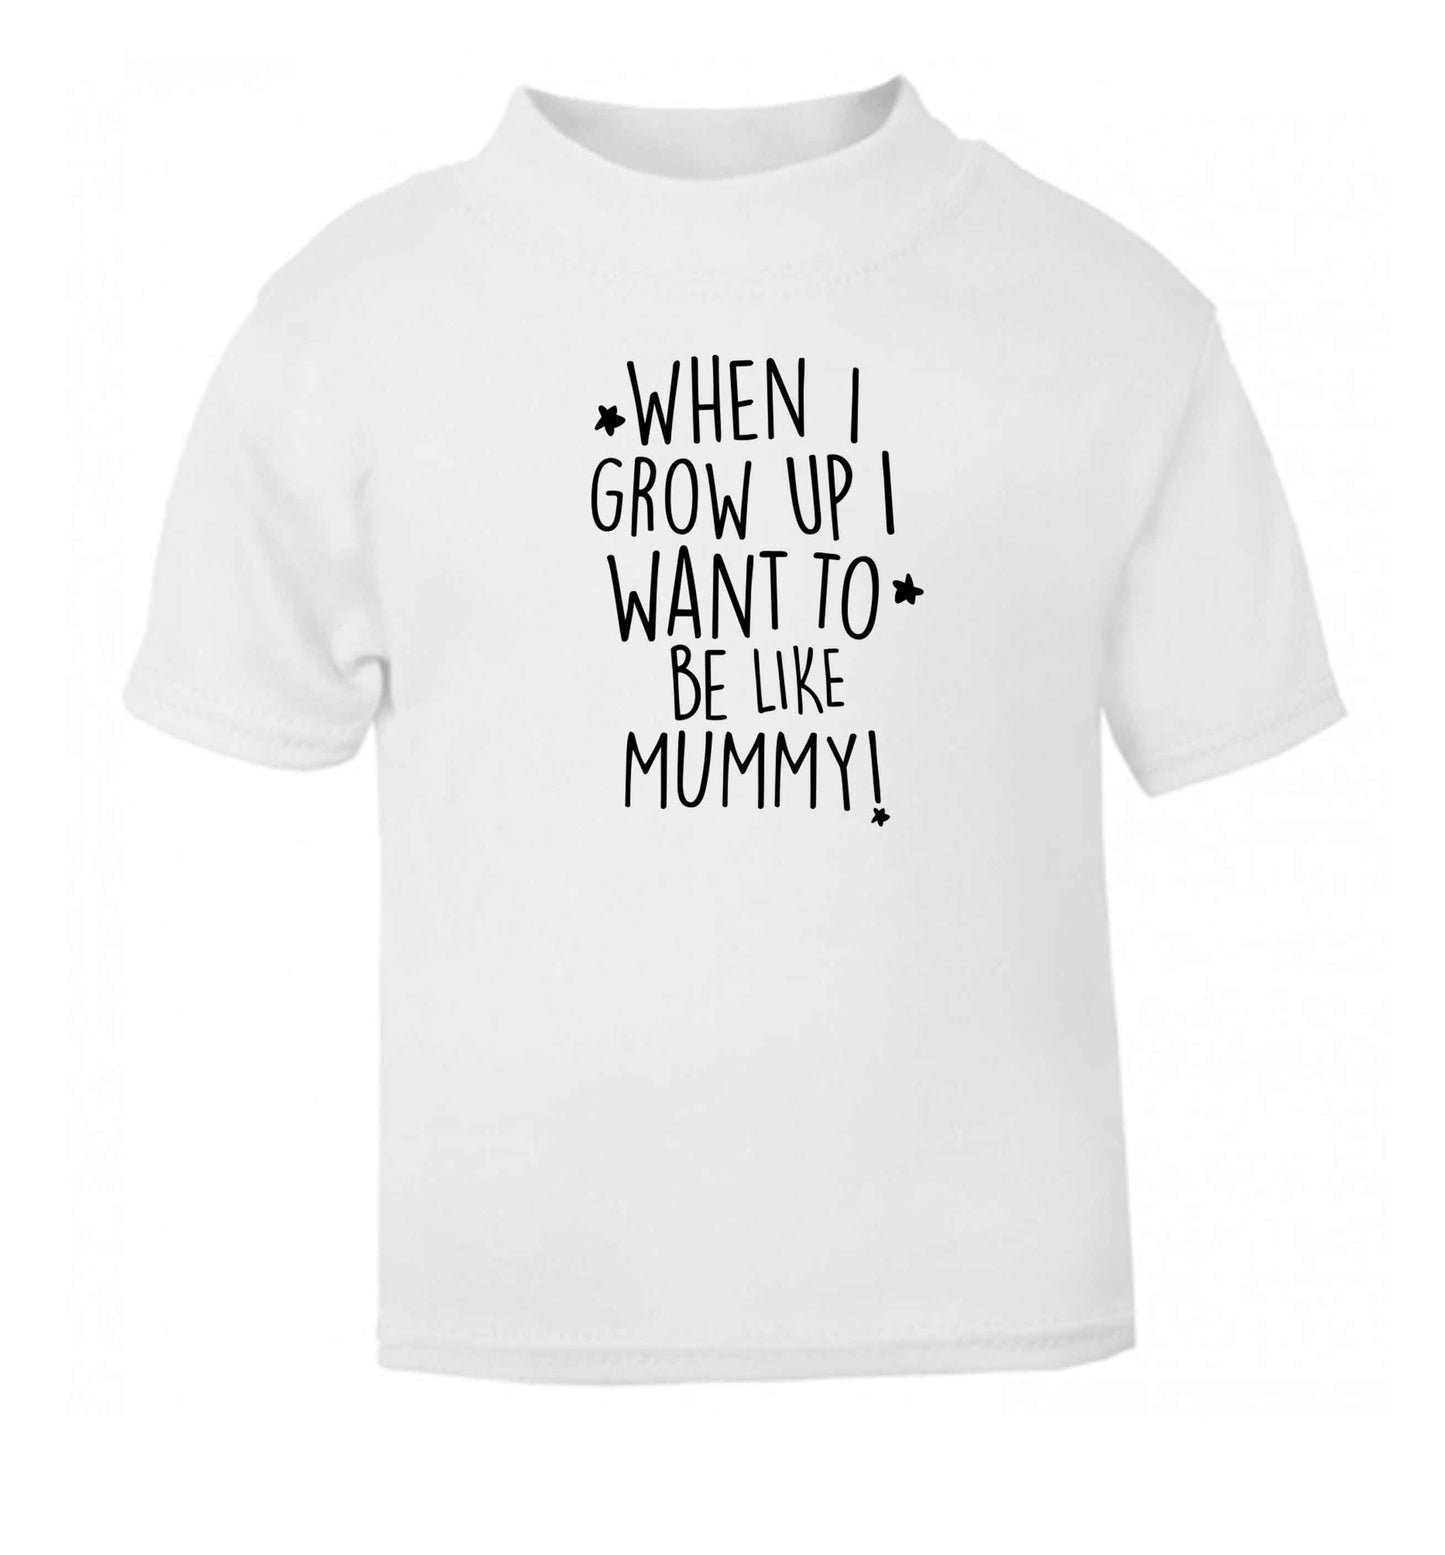 When I grow up I want to be like my mummy white baby toddler Tshirt 2 Years